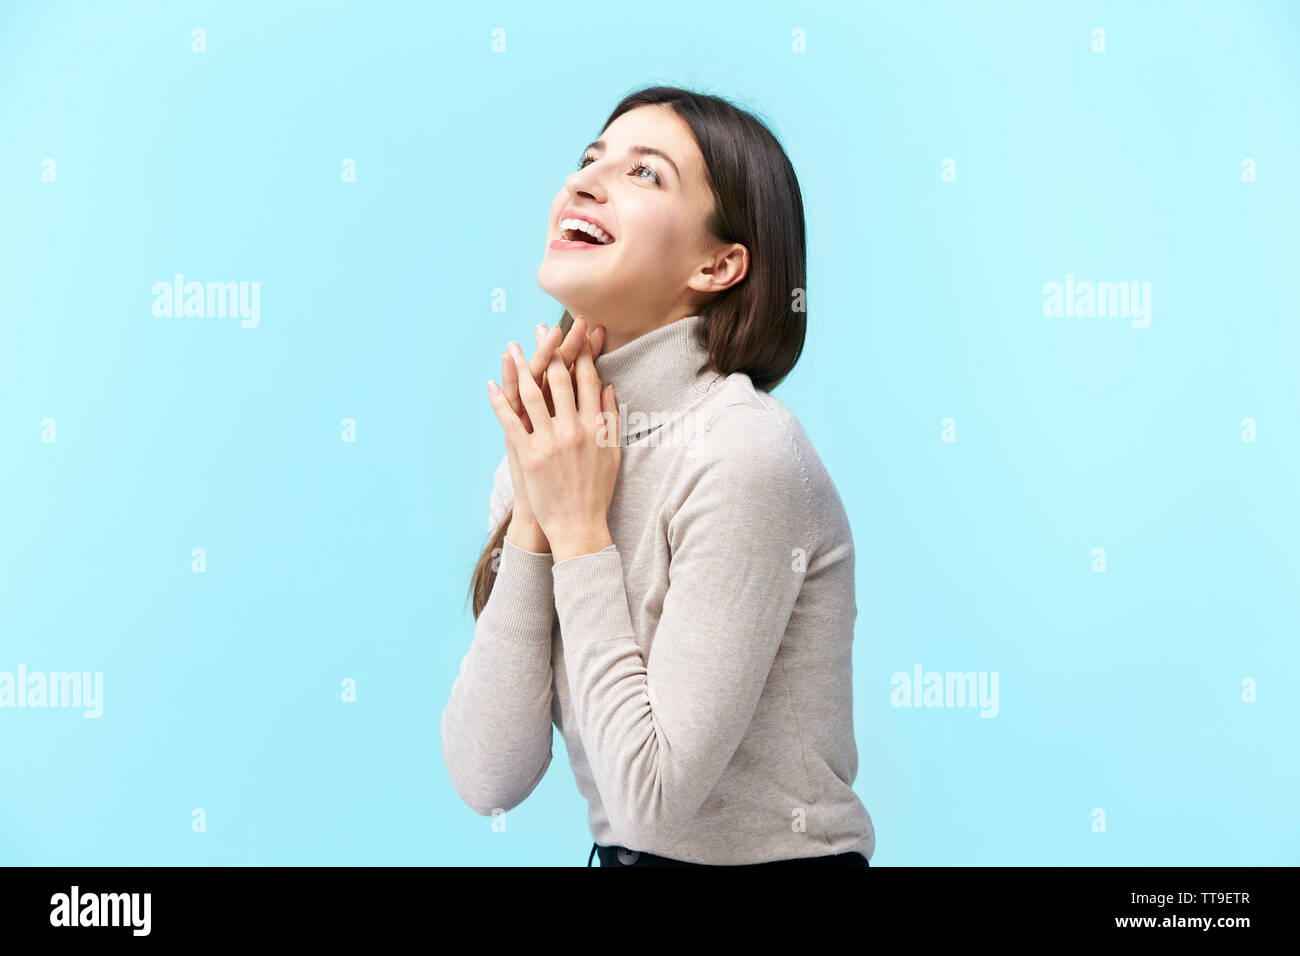 happy and smiling young caucasian woman looking up at the sky, isolated on blue background. Stock Photo